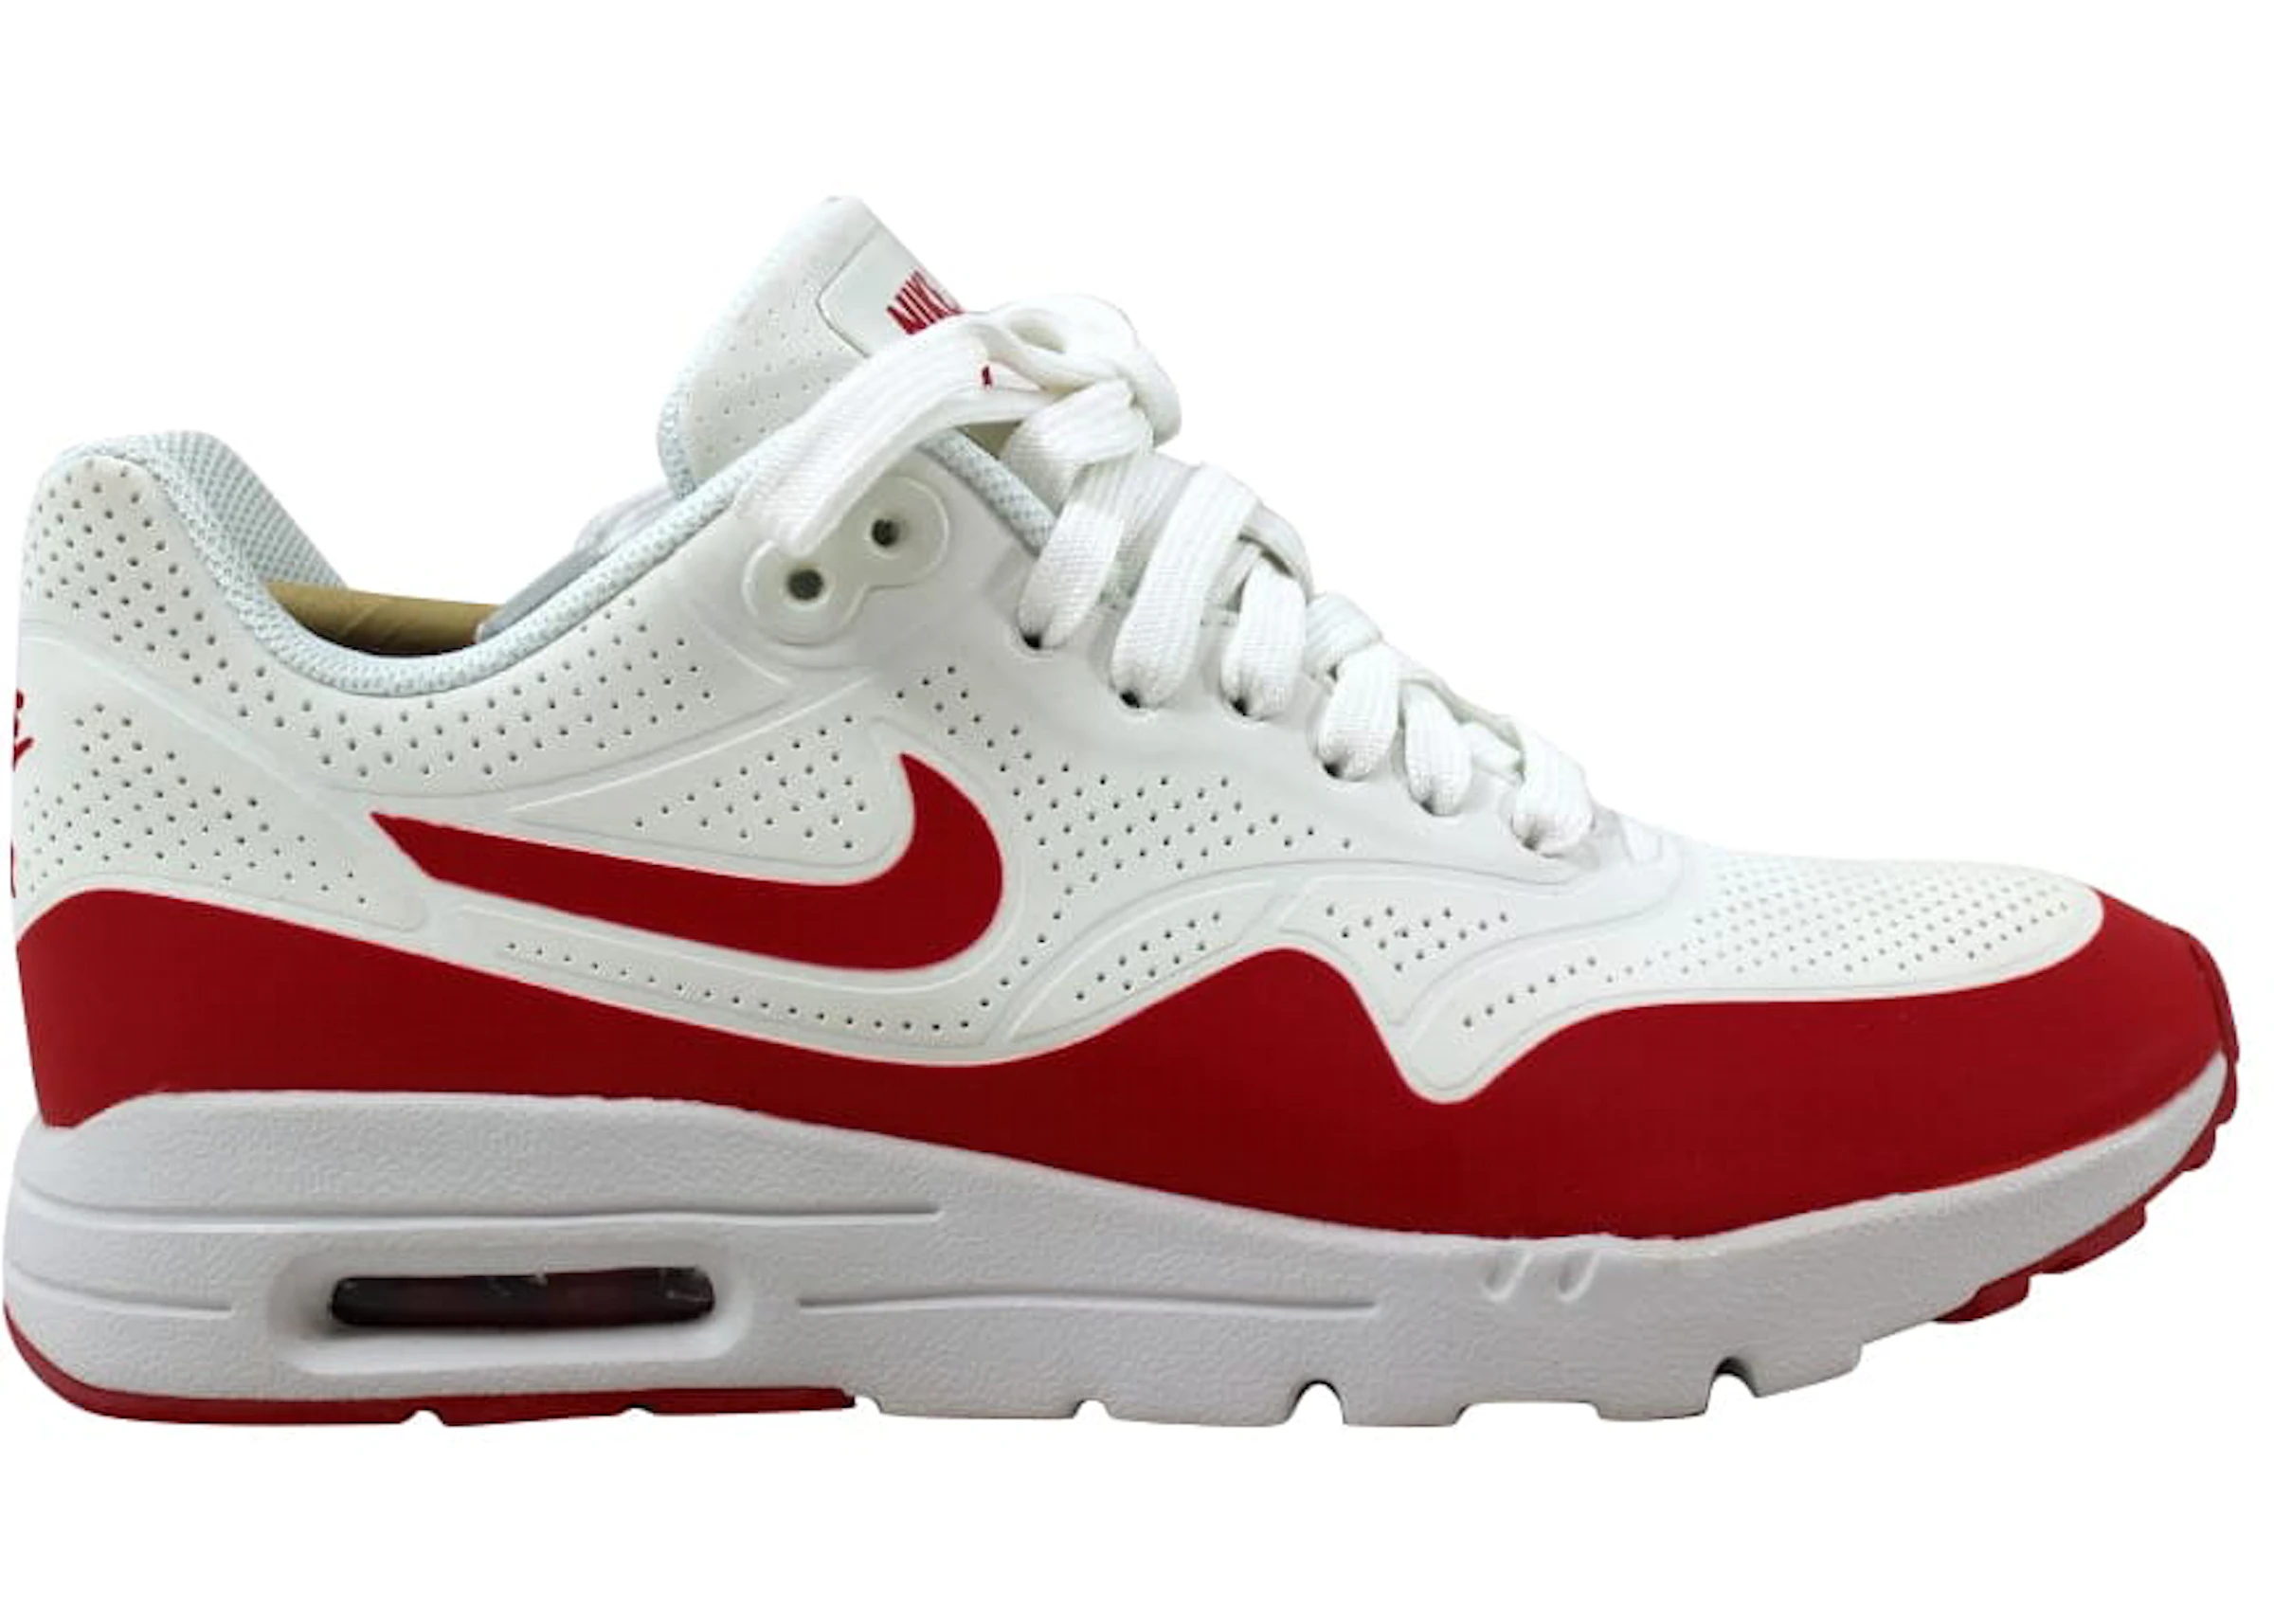 Nike Air Max Ultra Summit Red-White (Women's) - 704995-102 US